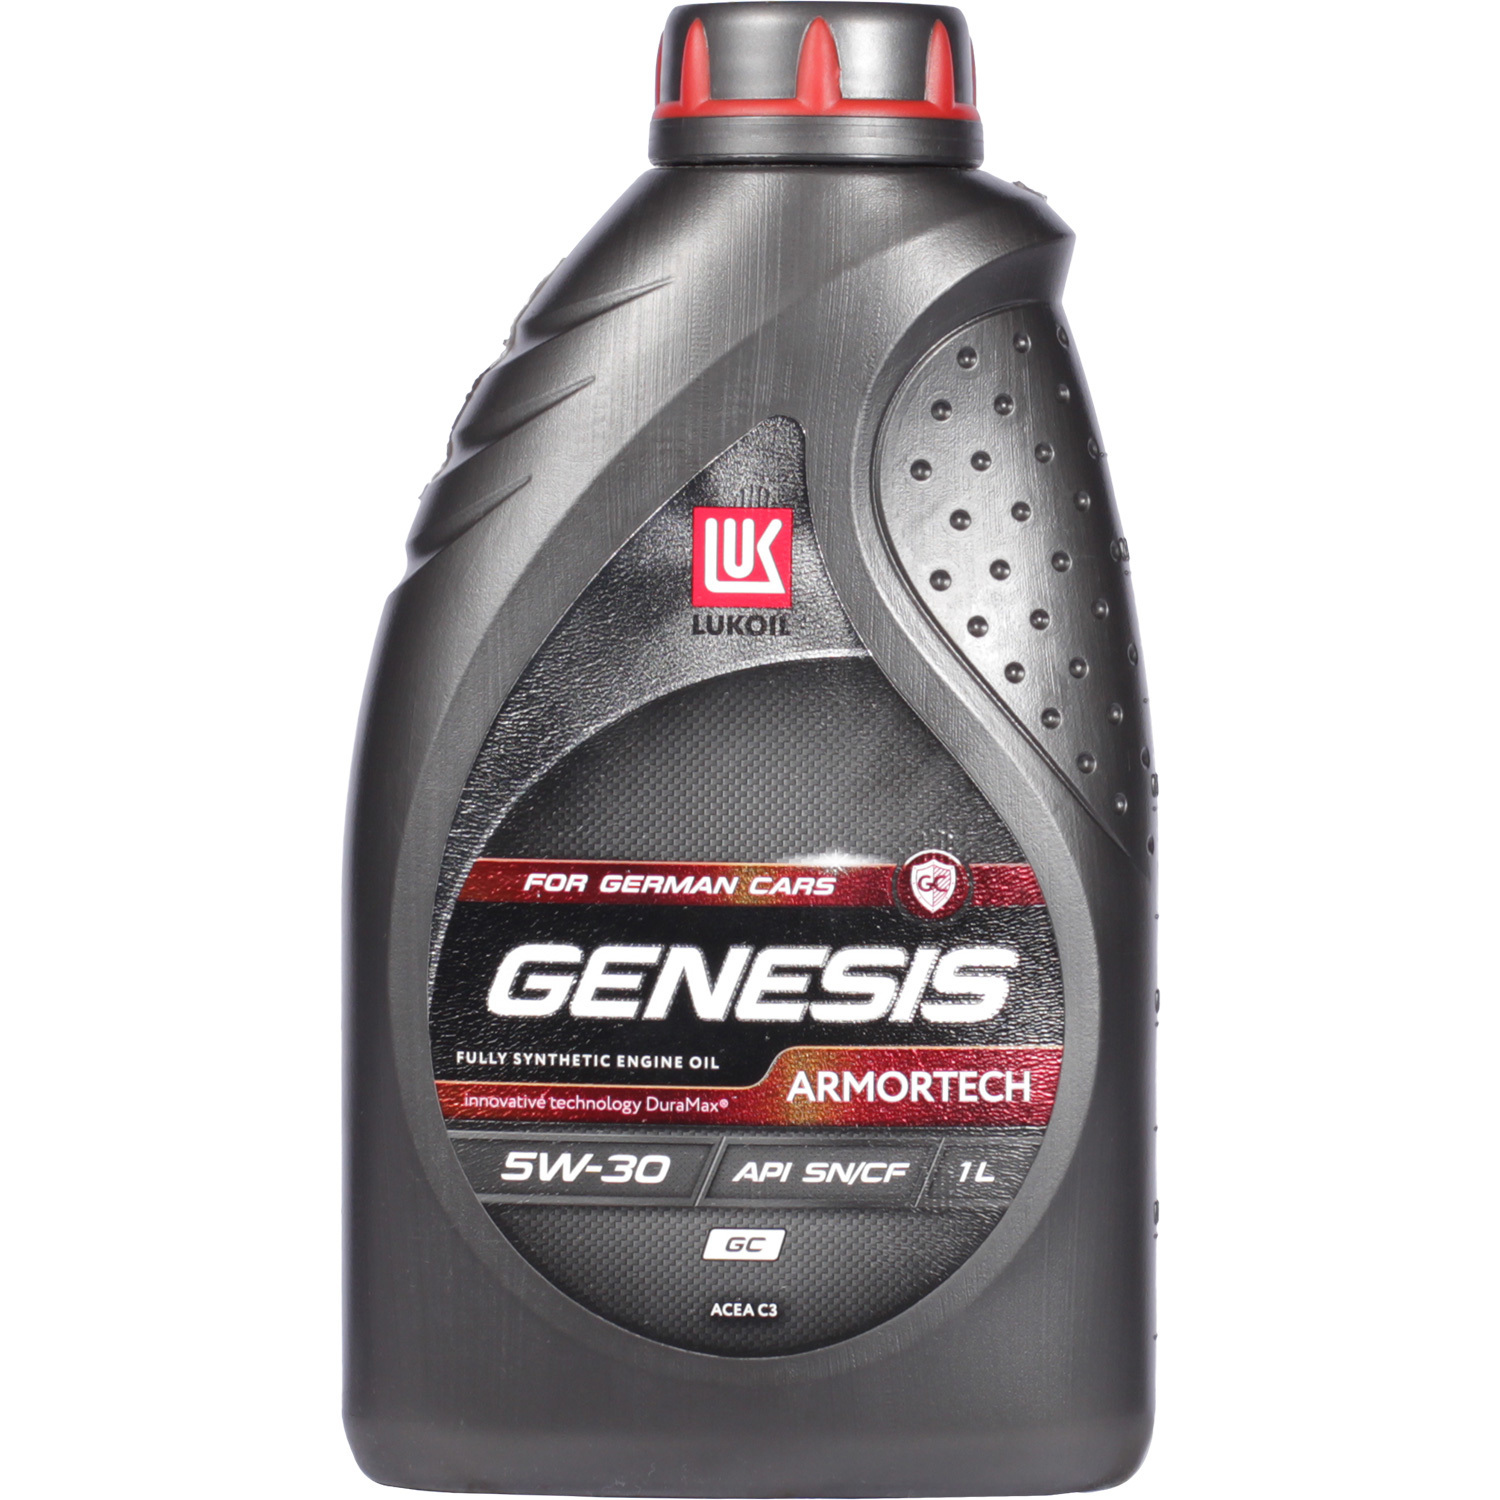 Lukoil Моторное масло Lukoil Genesis Armortech GC 5W-30, 1 л lukoil моторное масло lukoil genesis armortech gc 5w 30 1 л